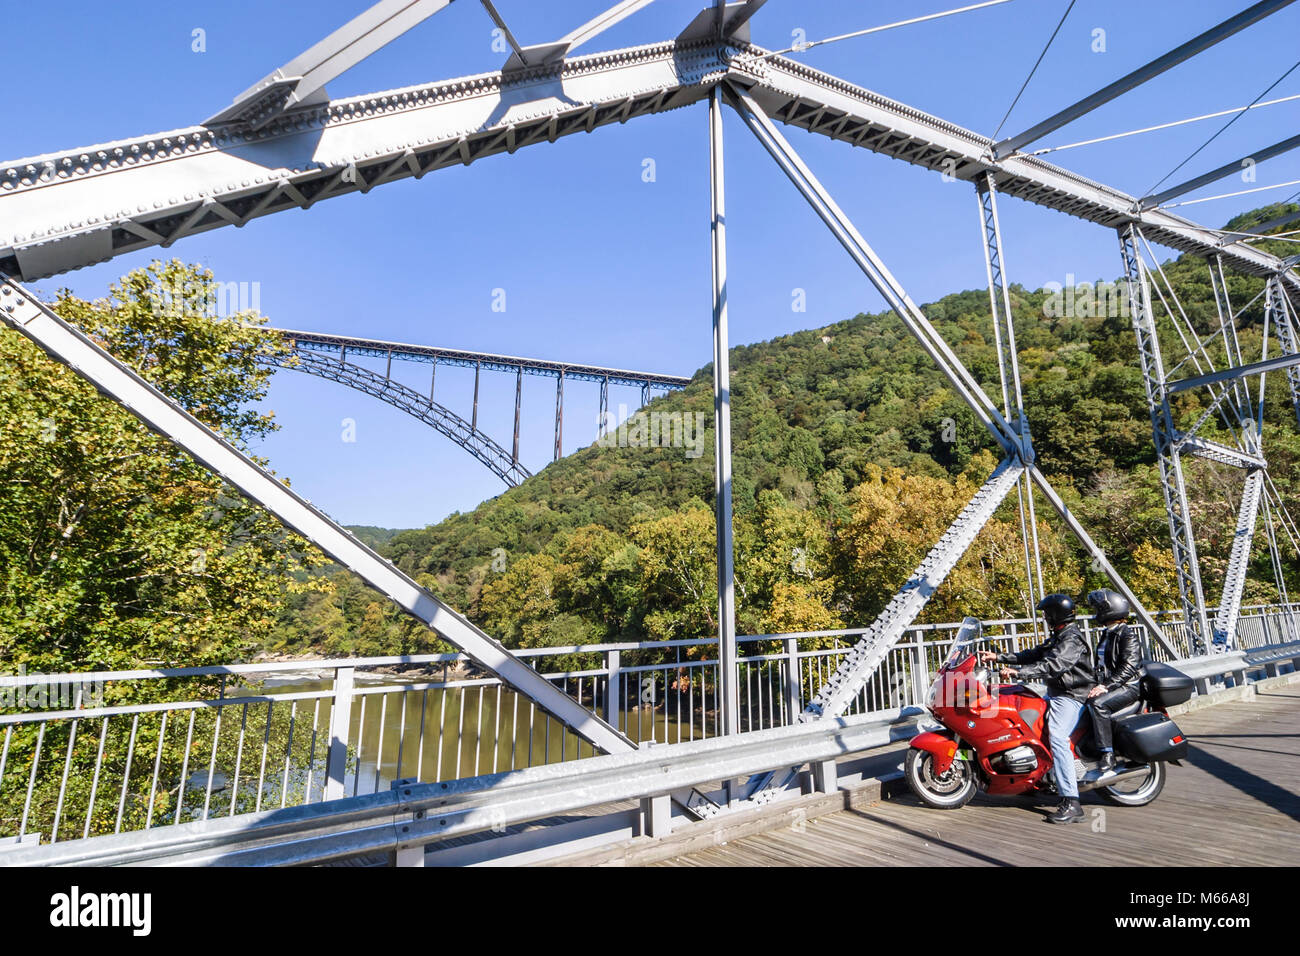 Virginie occidentale,Appalachia Fayette County,Fayetteville,New River gorge National River,eau,affluent,Appalaches Mountains,Fayette Station Bridge,Overp Banque D'Images